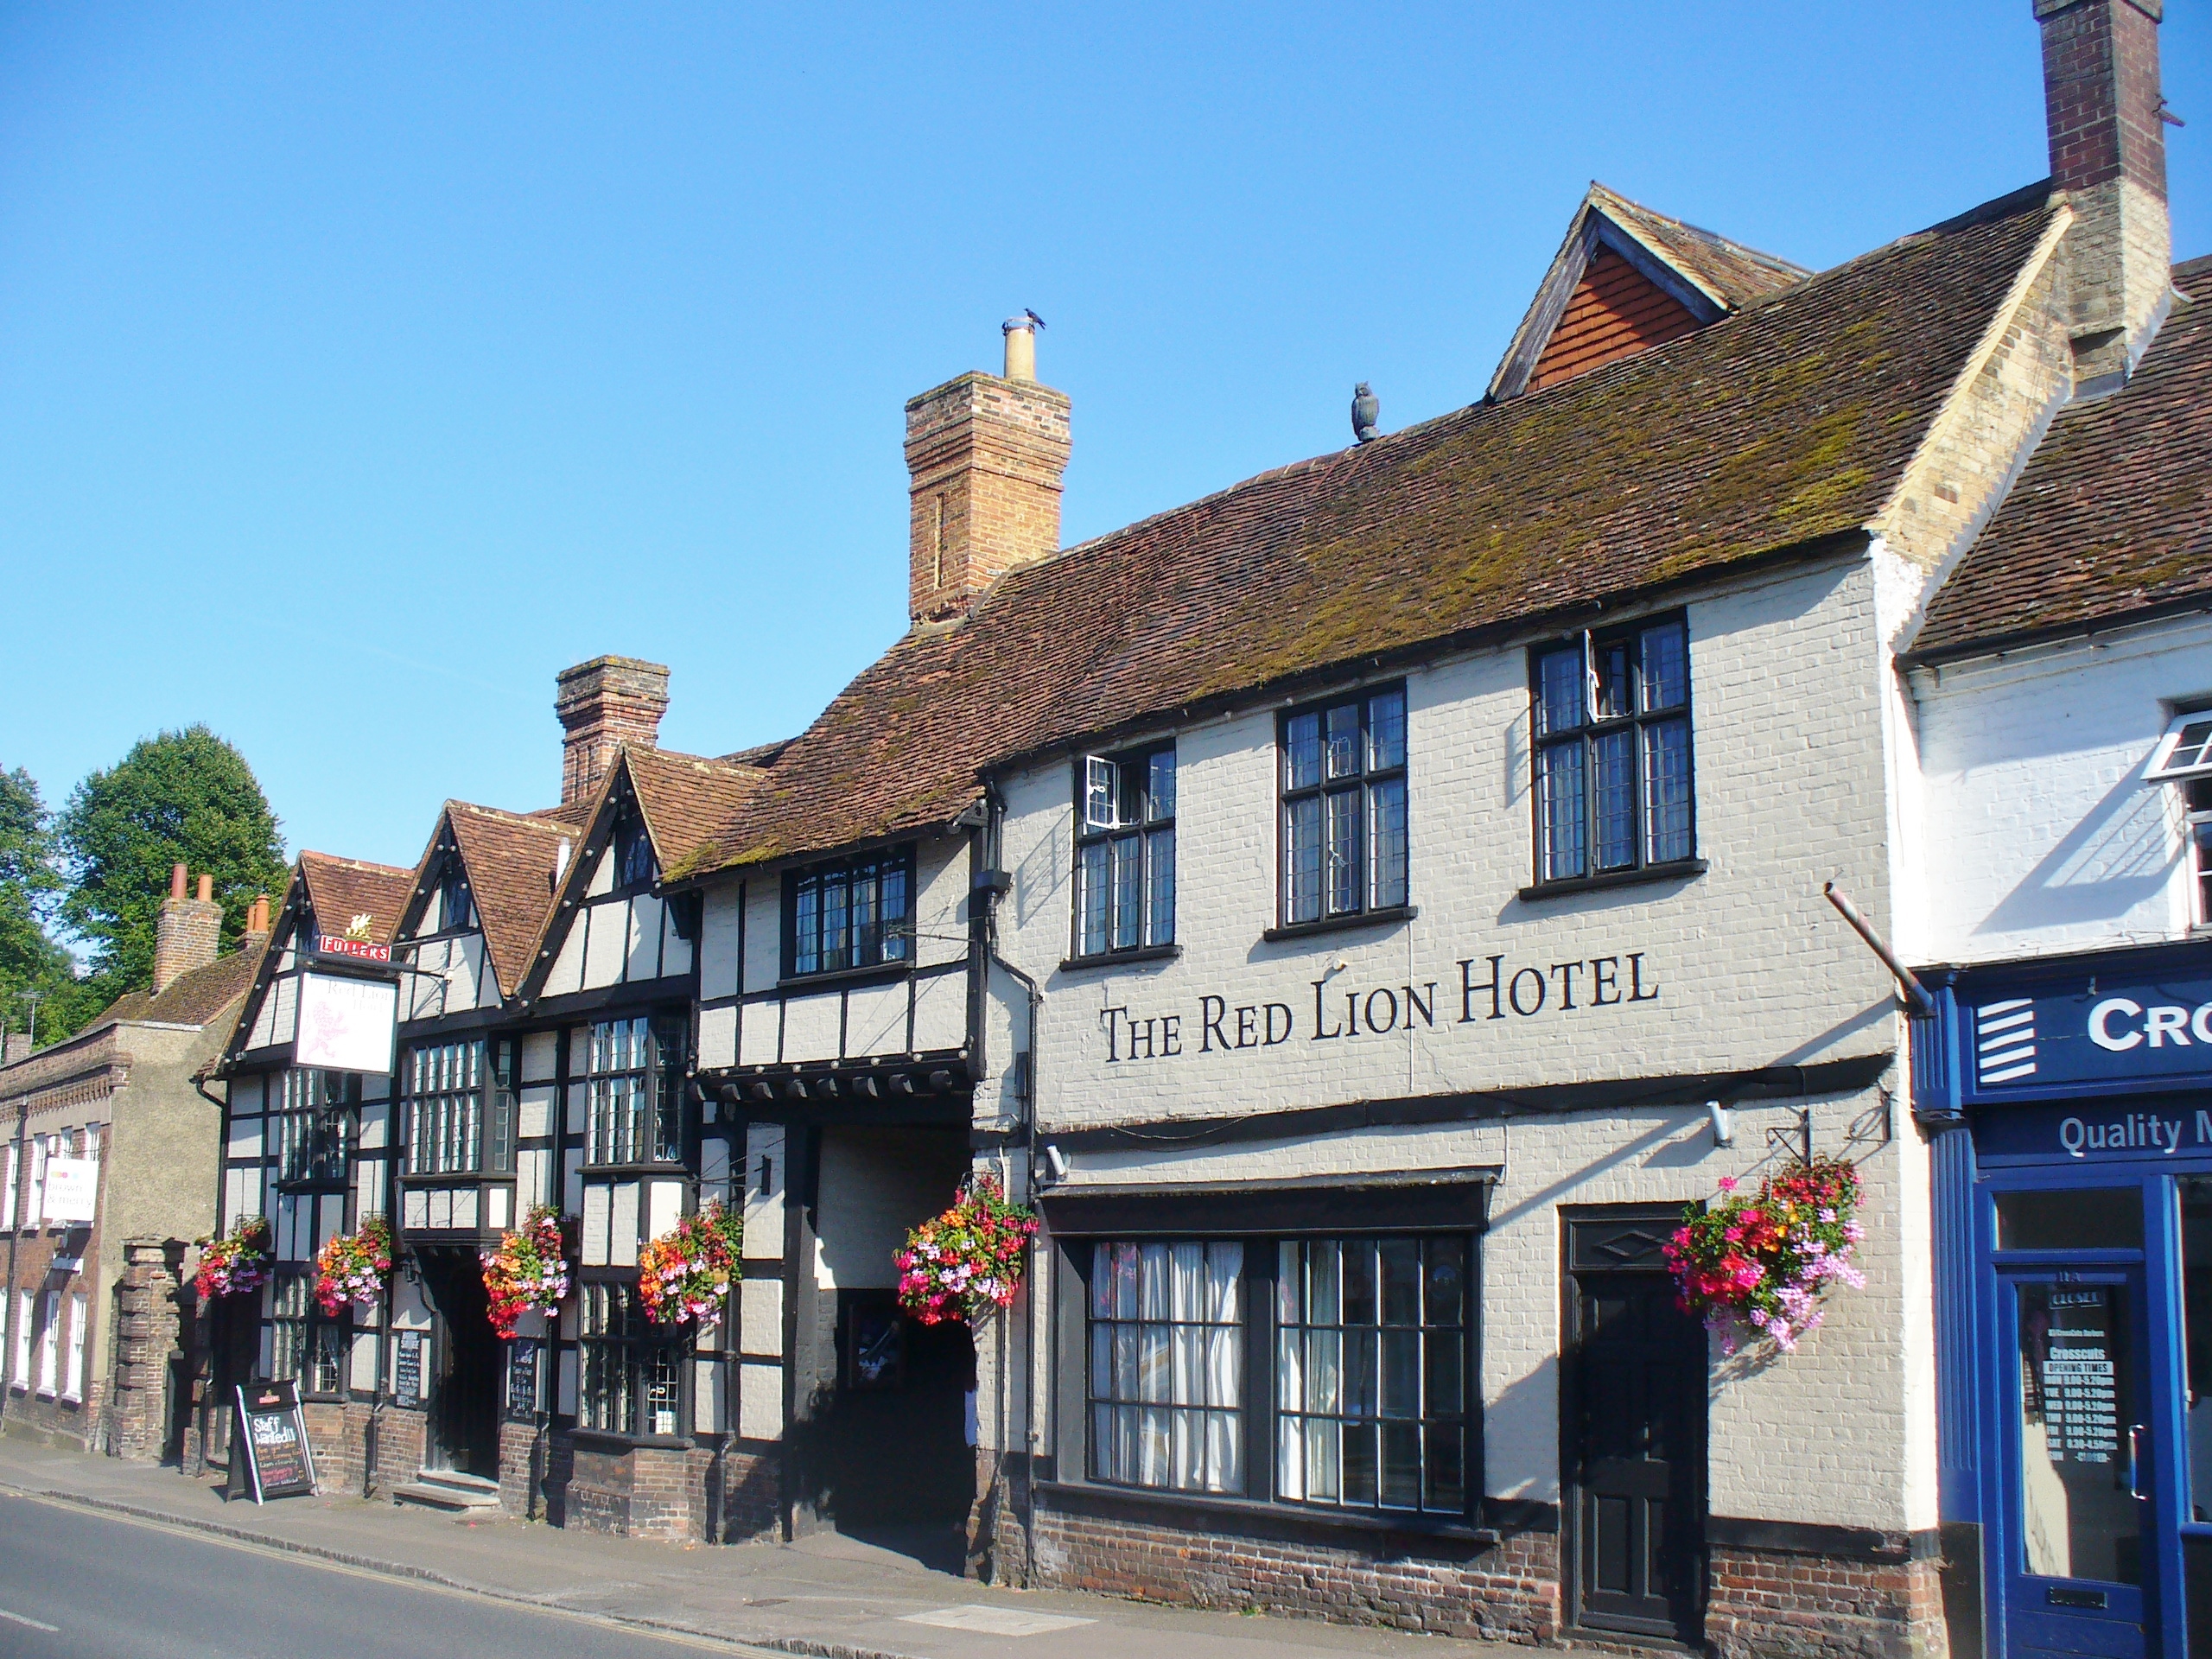 Wendover - The Red Lion Hotel (geograph 5275346).jpg. 